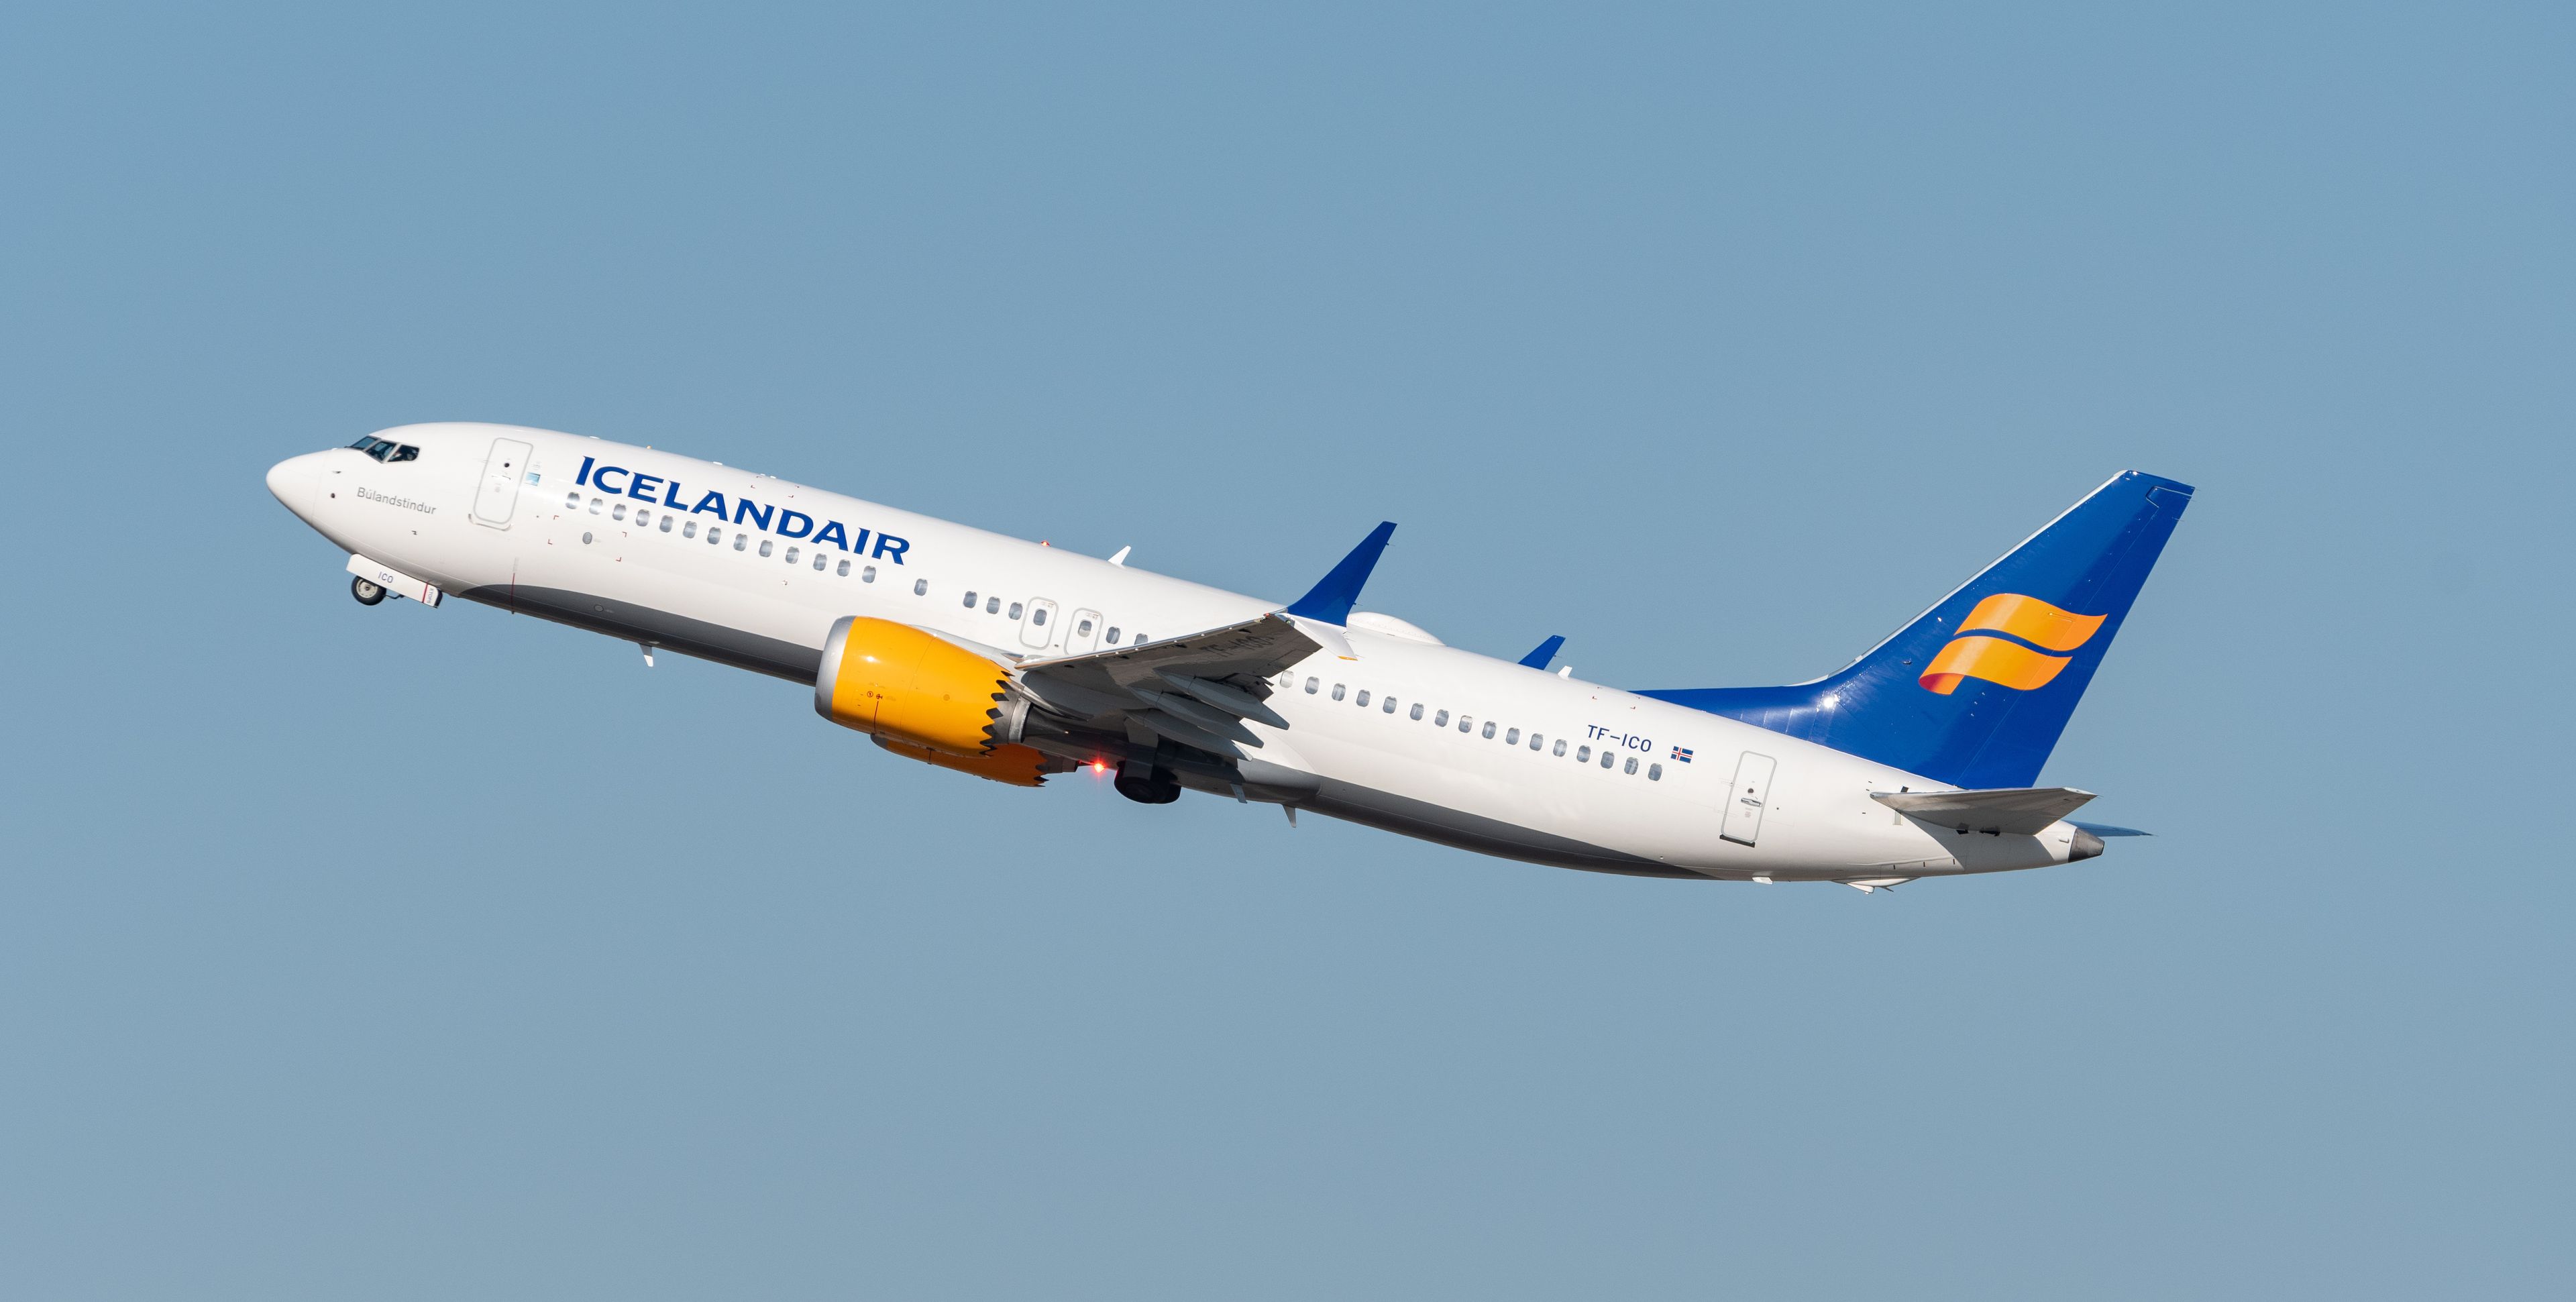 plane of the company "icelandair" in full takeoff, with a blue sky in bottom